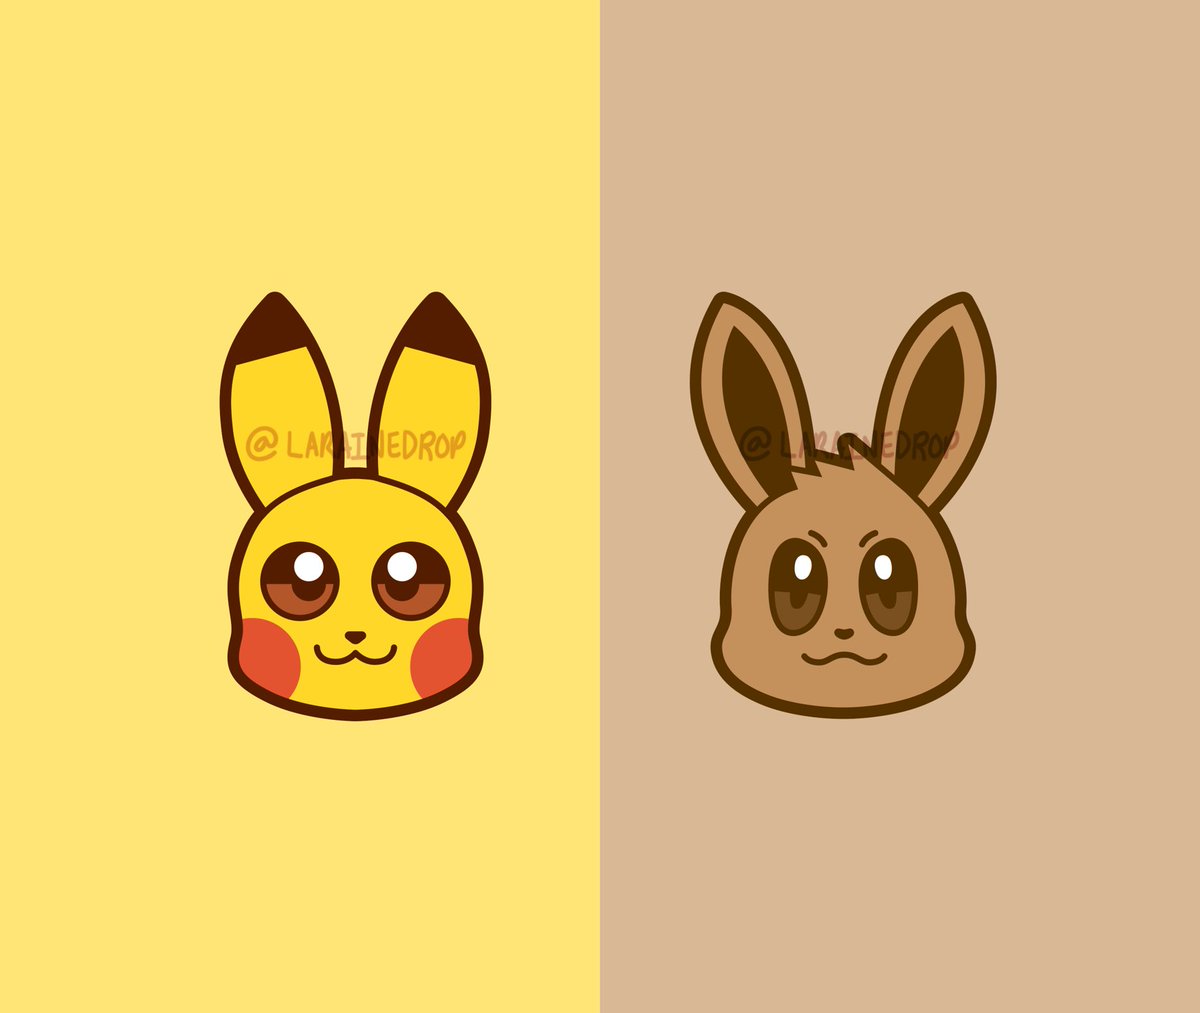 Pikachu & Eevee 🟨🐭 🟫🦊

Check out my Redbubble shop to get these little guys on stuff like stickers, shirts, buttons, and more.

#pokemon #pokémon #pikachu #eevee #pokemonyellow #pokemonart #pokémonart #digitalart #affinitydesigner #cute